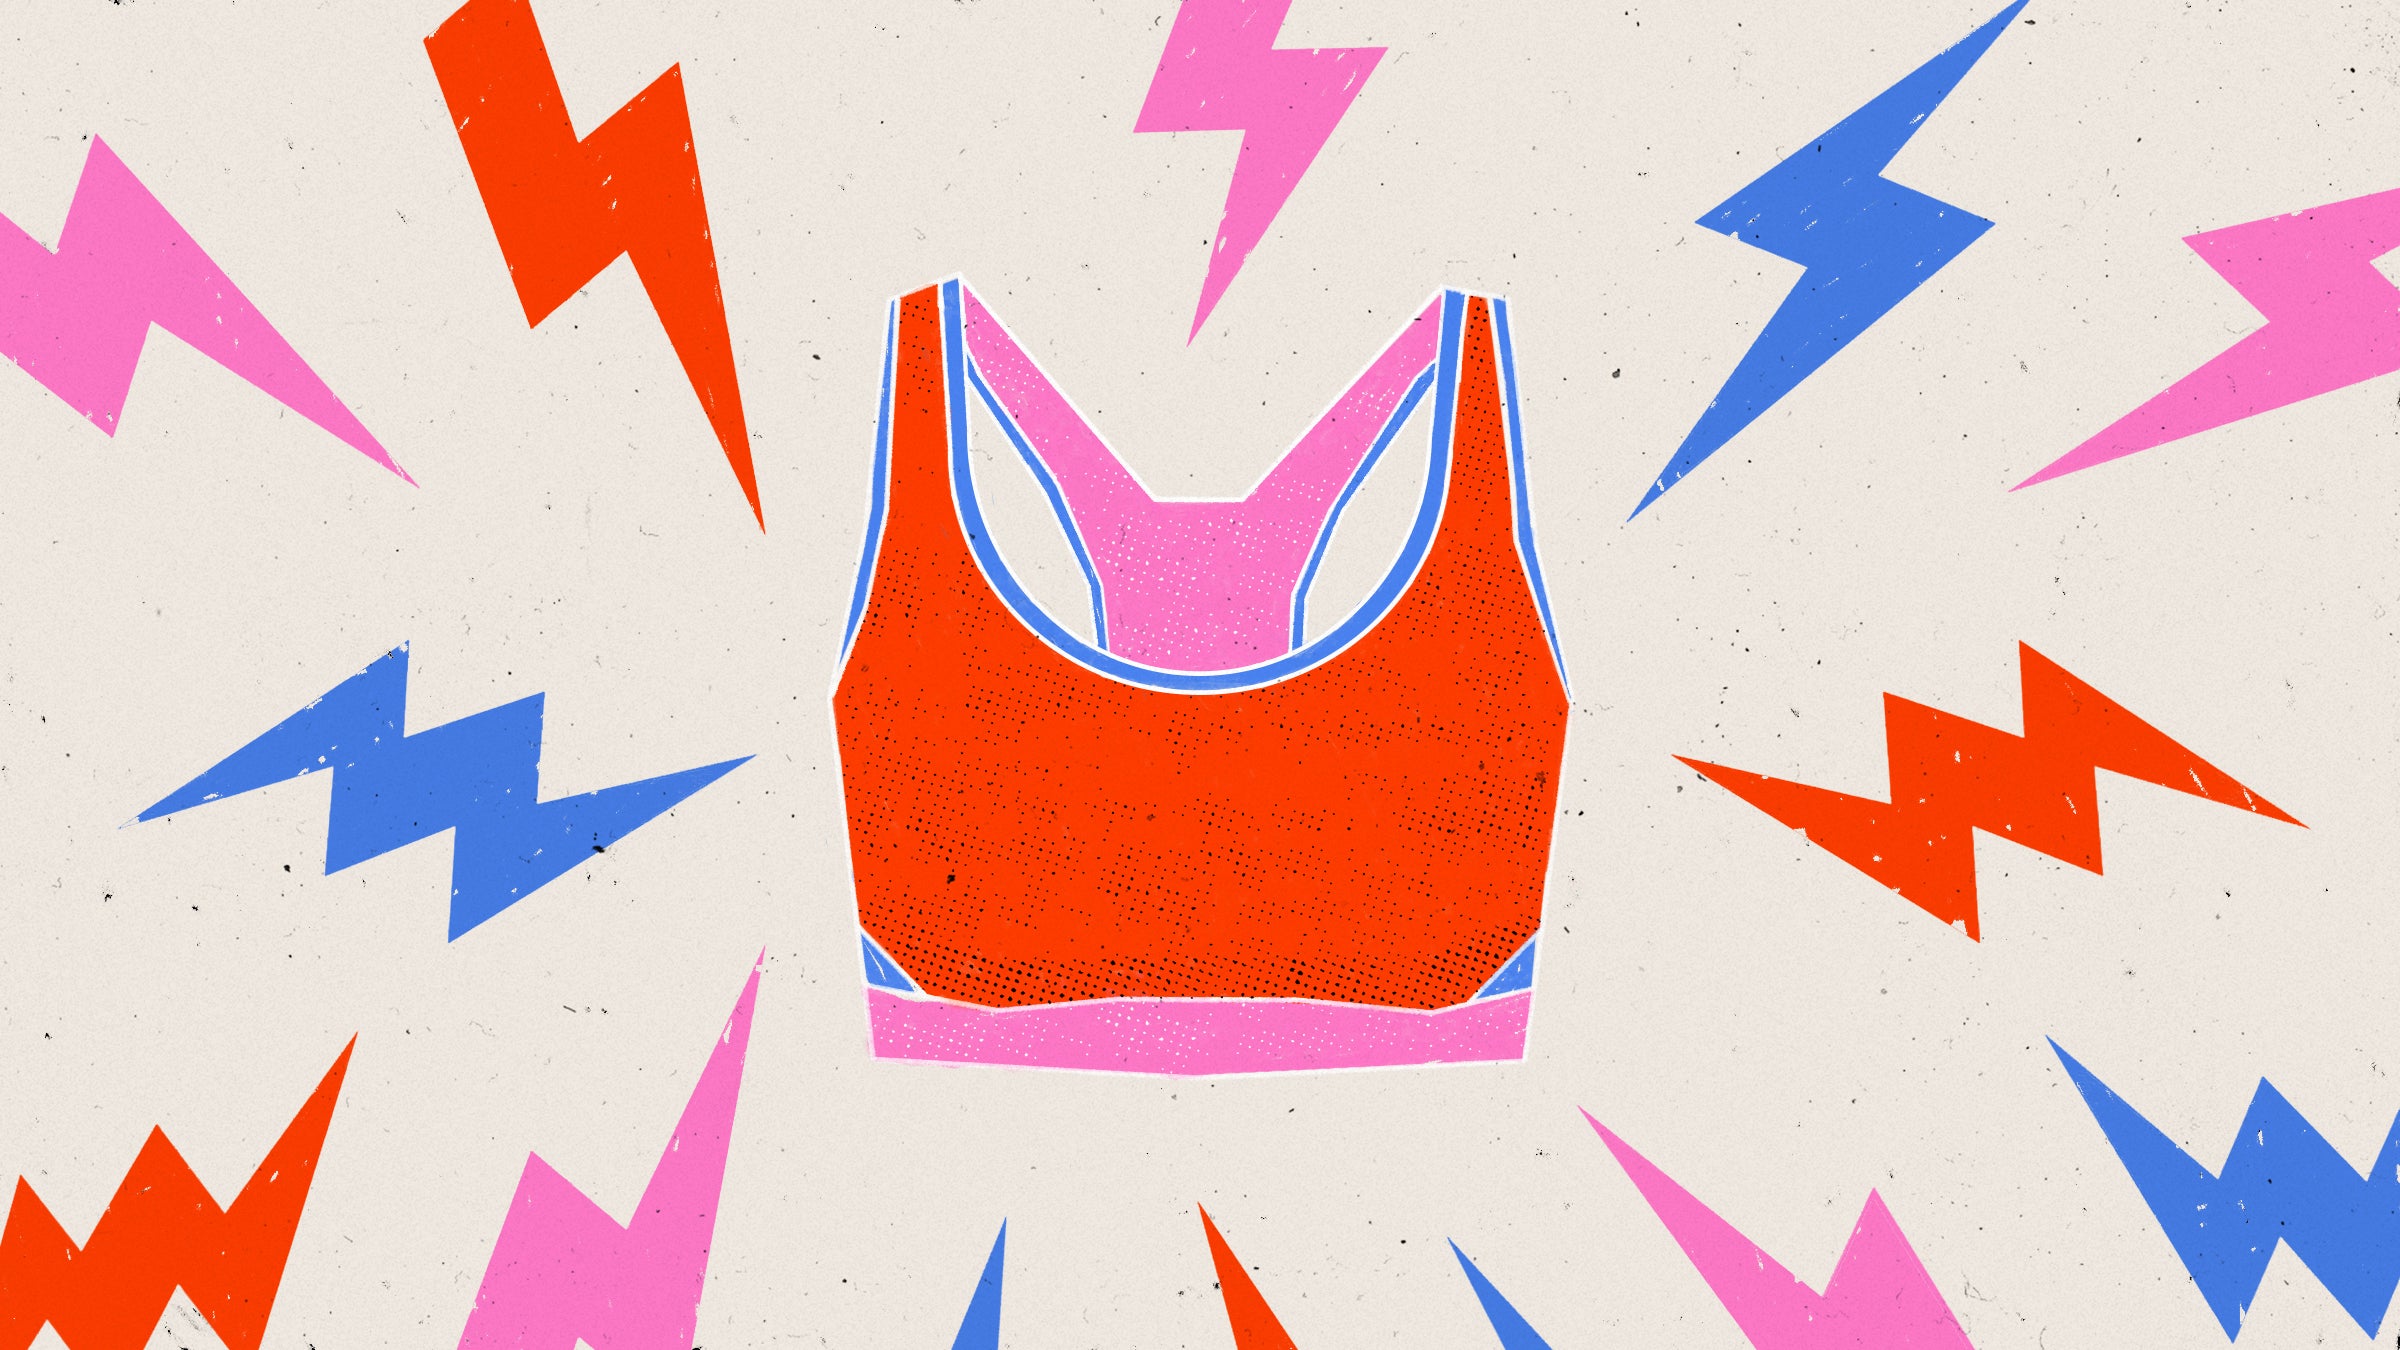 Hold tight London: these new-gen sports bras are smarter than ever